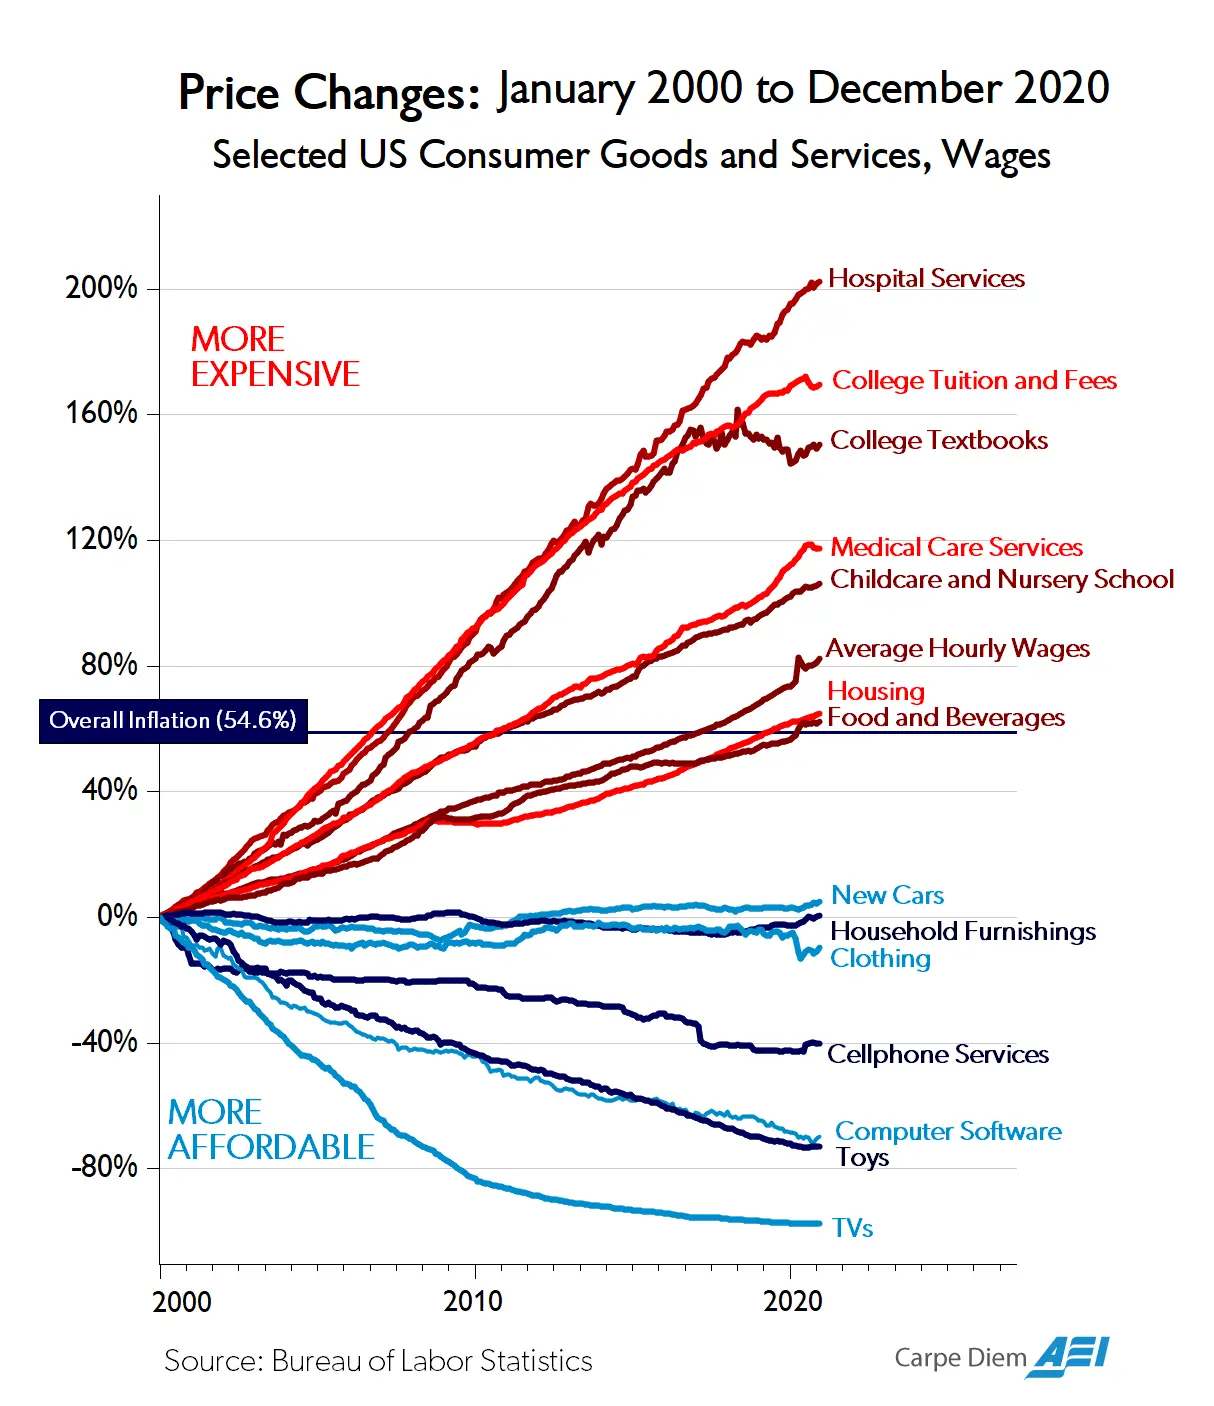 U.S. Price Changes (2000 to 2020)